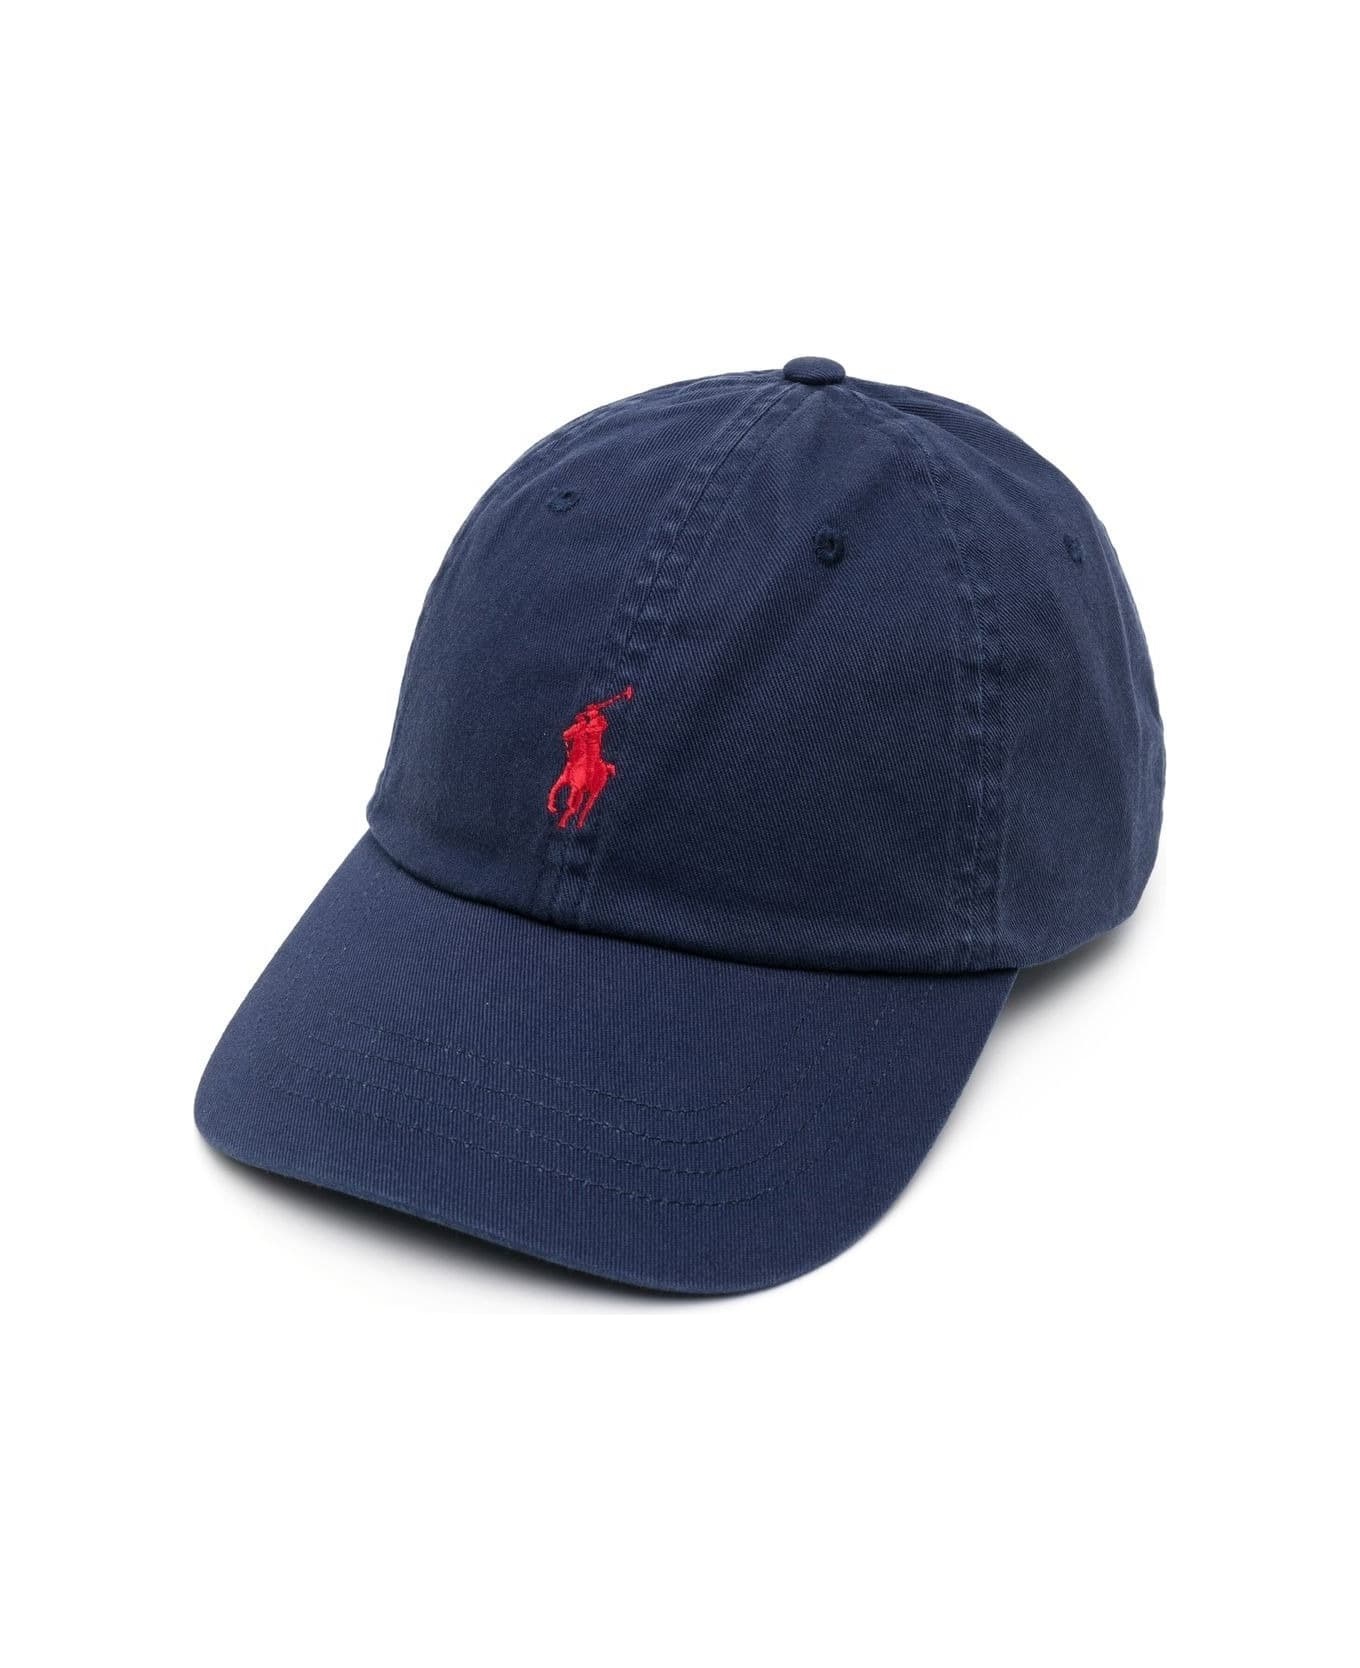 Night Blue Baseball Hat With Red Pony - 1